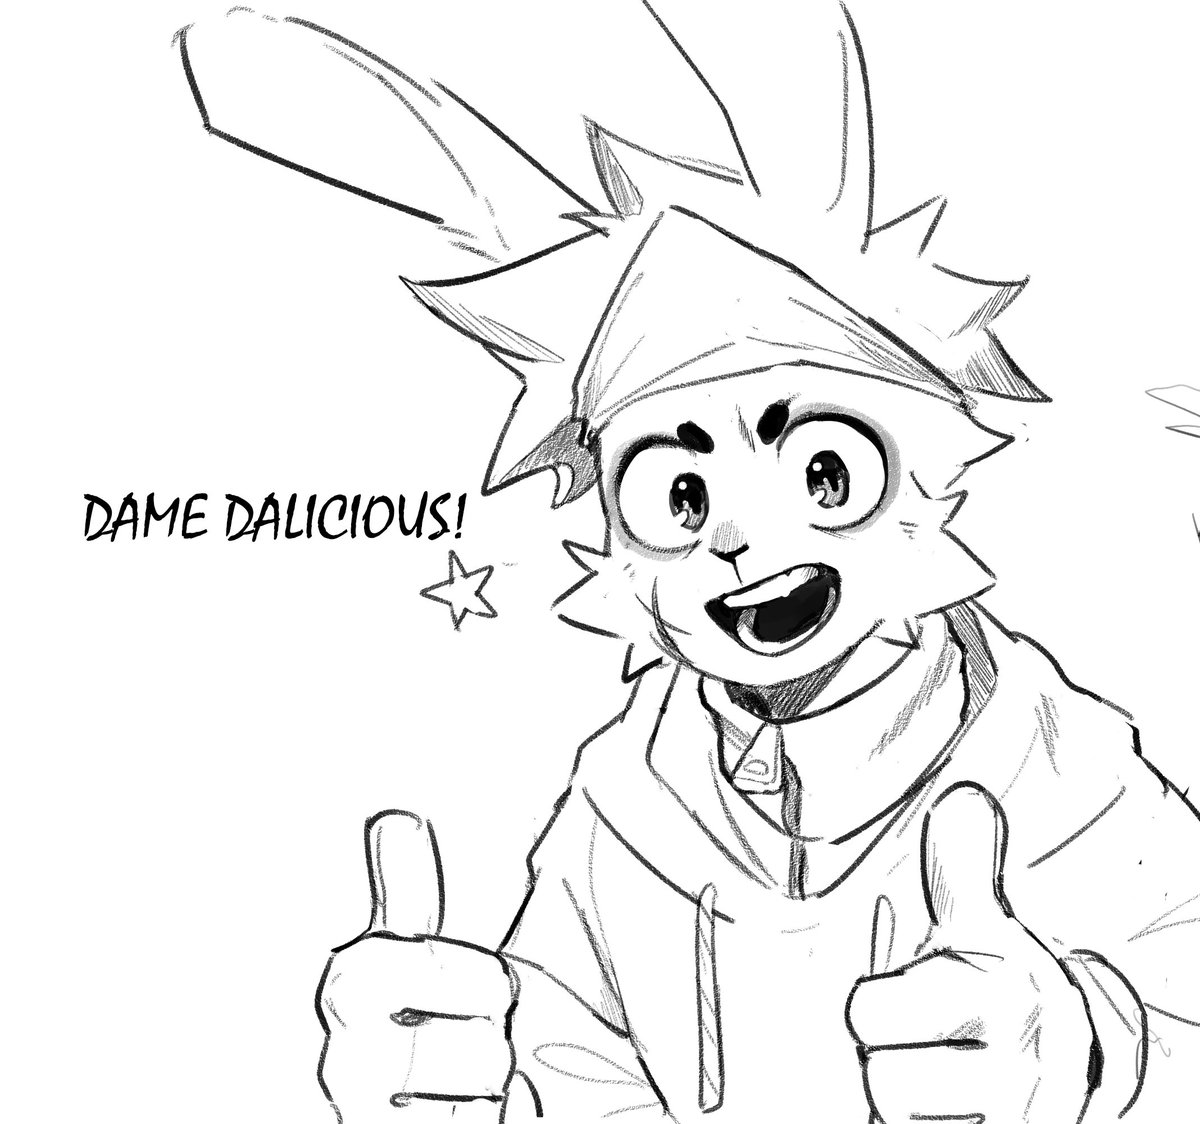 accidentally emulated the bnha art style and i dont know what to do 